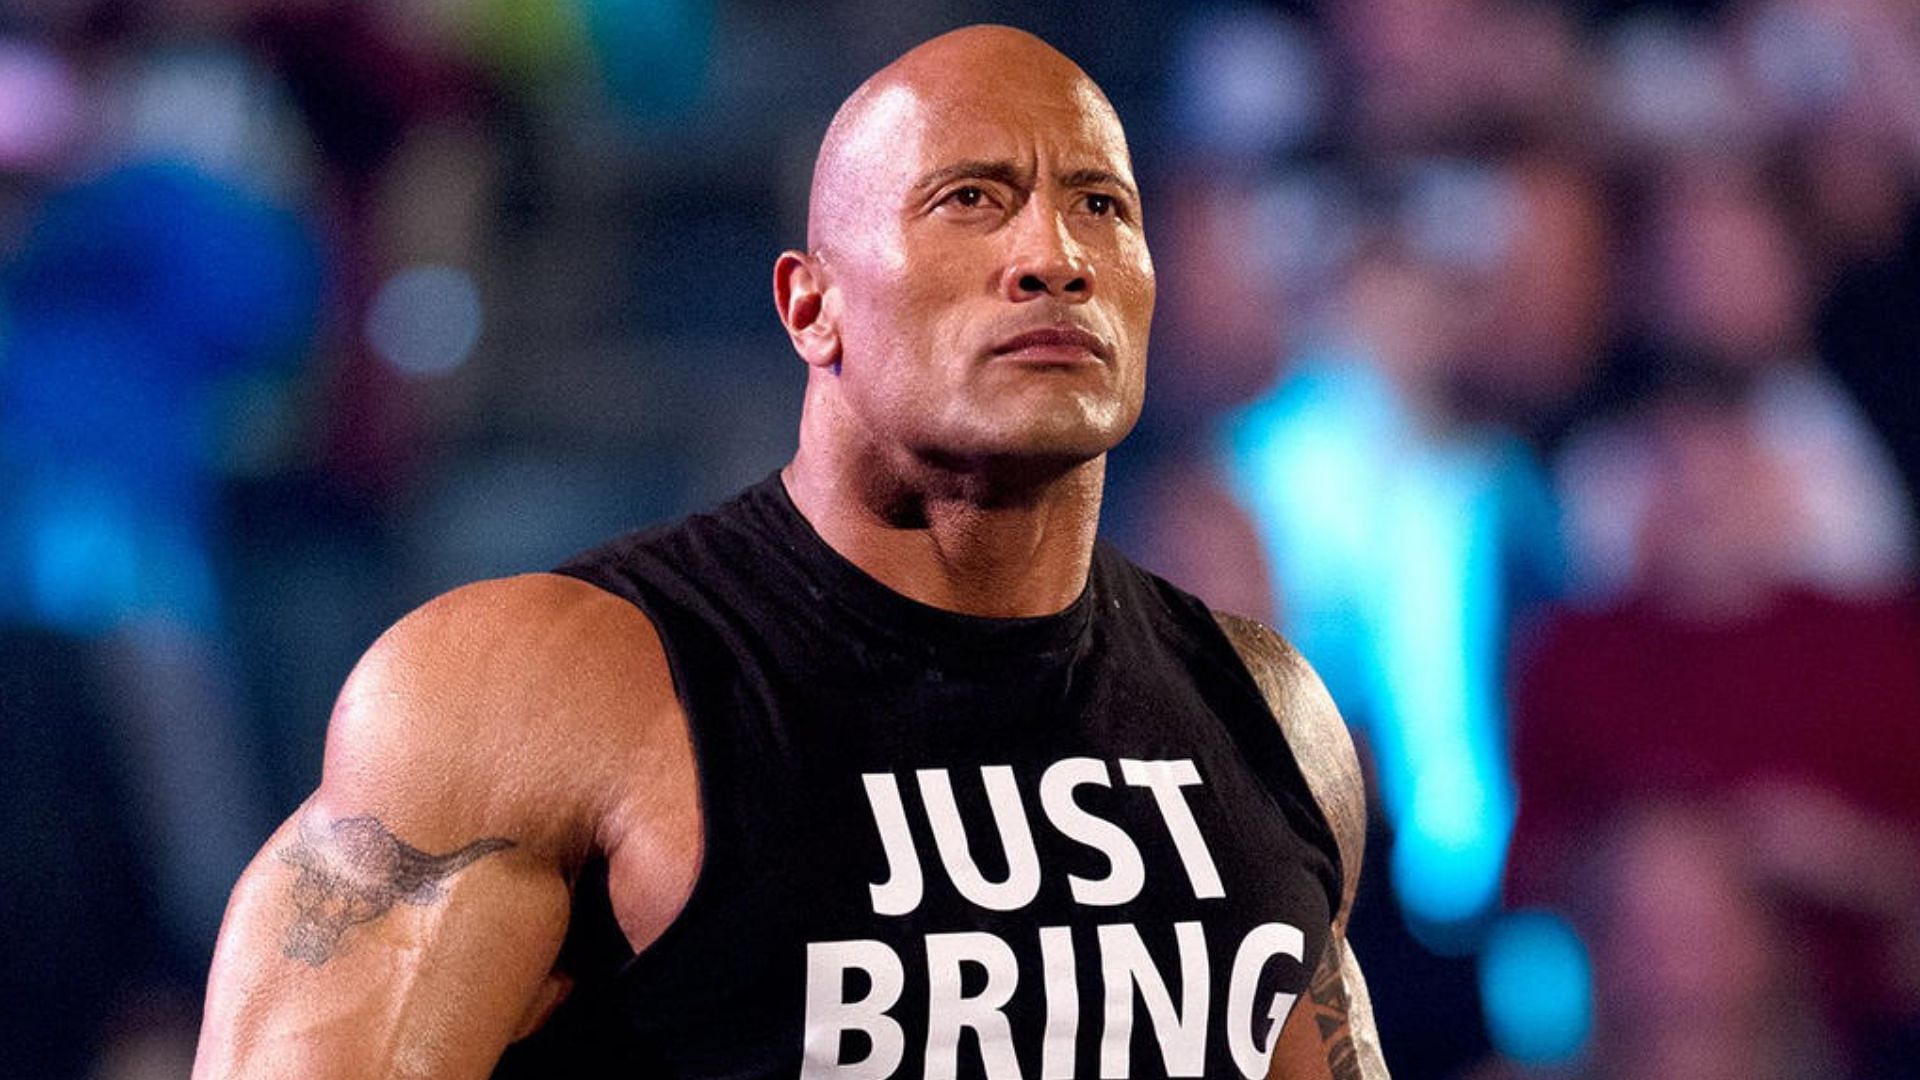 Will The Rock ever return to WWE?